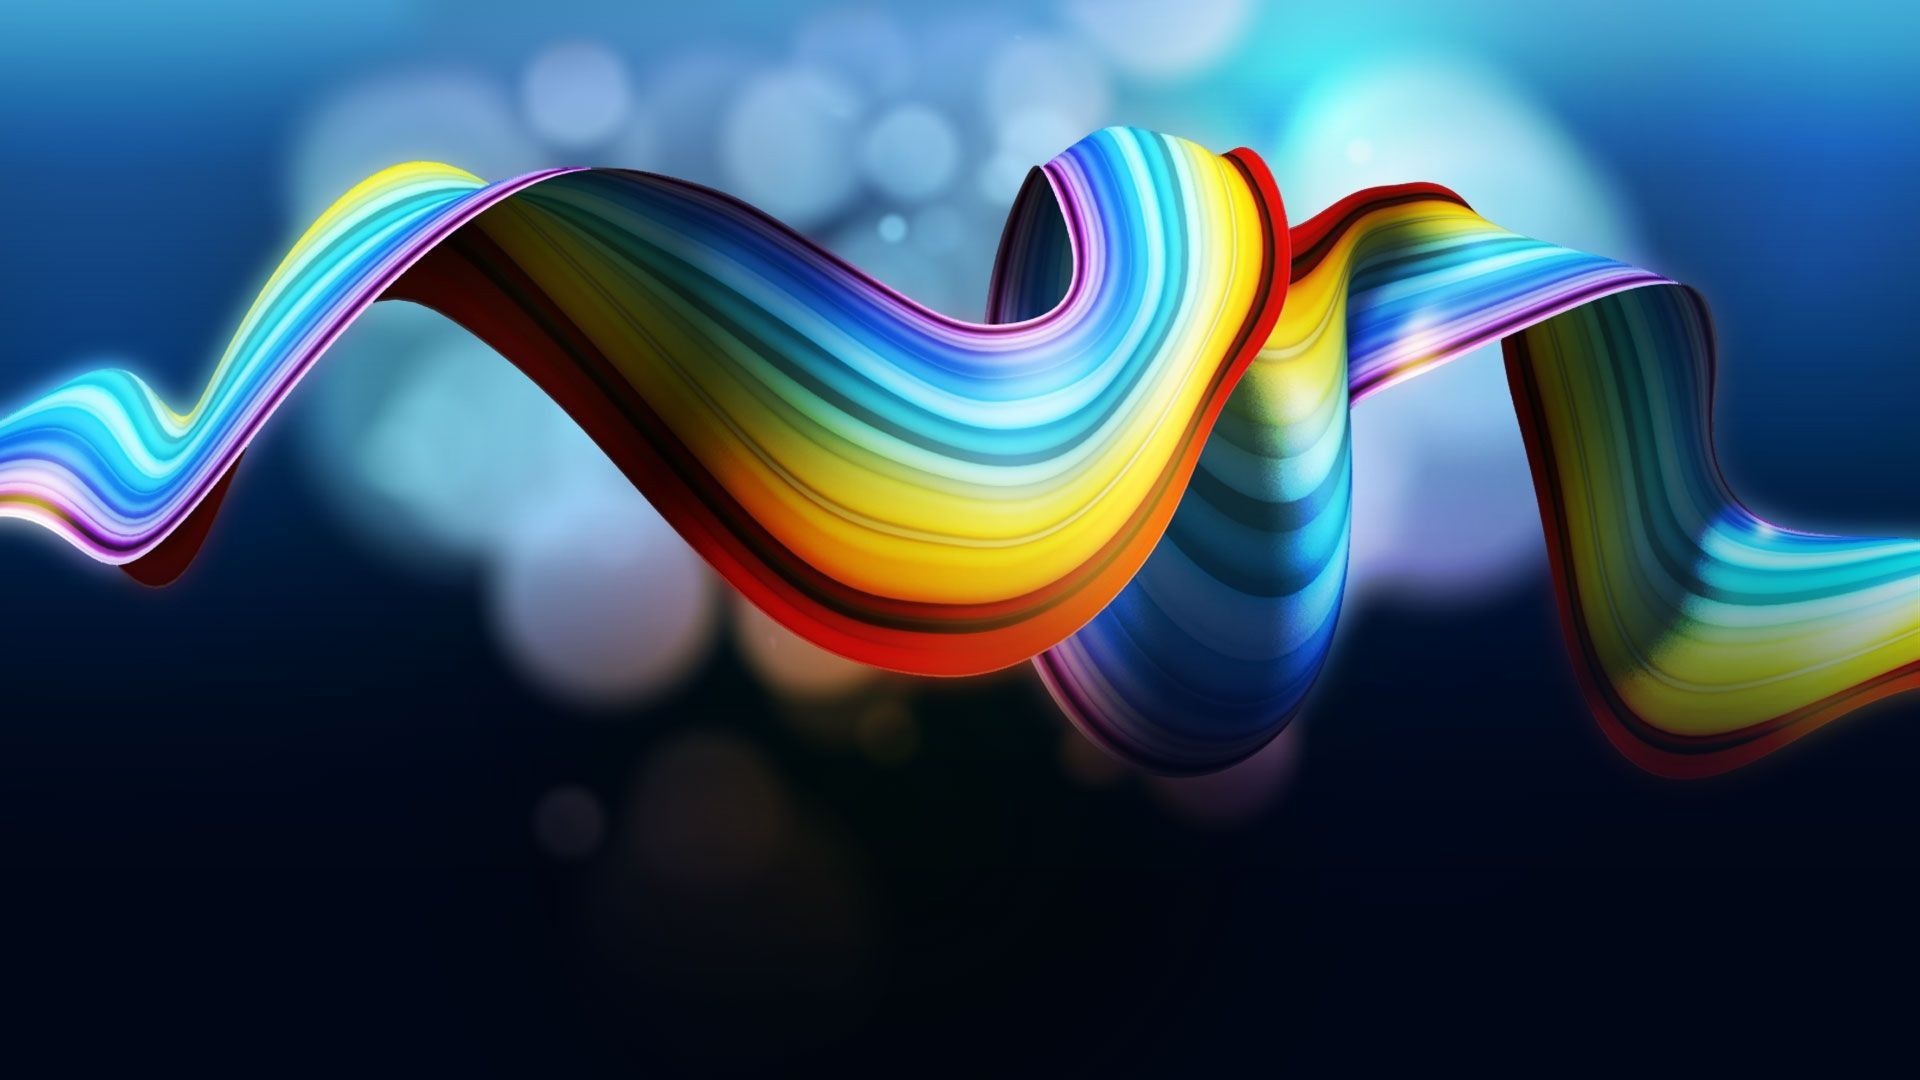 Rainbow wallpapers, Colorful backgrounds, Vibrant and fun, Eye-catching designs, 1920x1080 Full HD Desktop